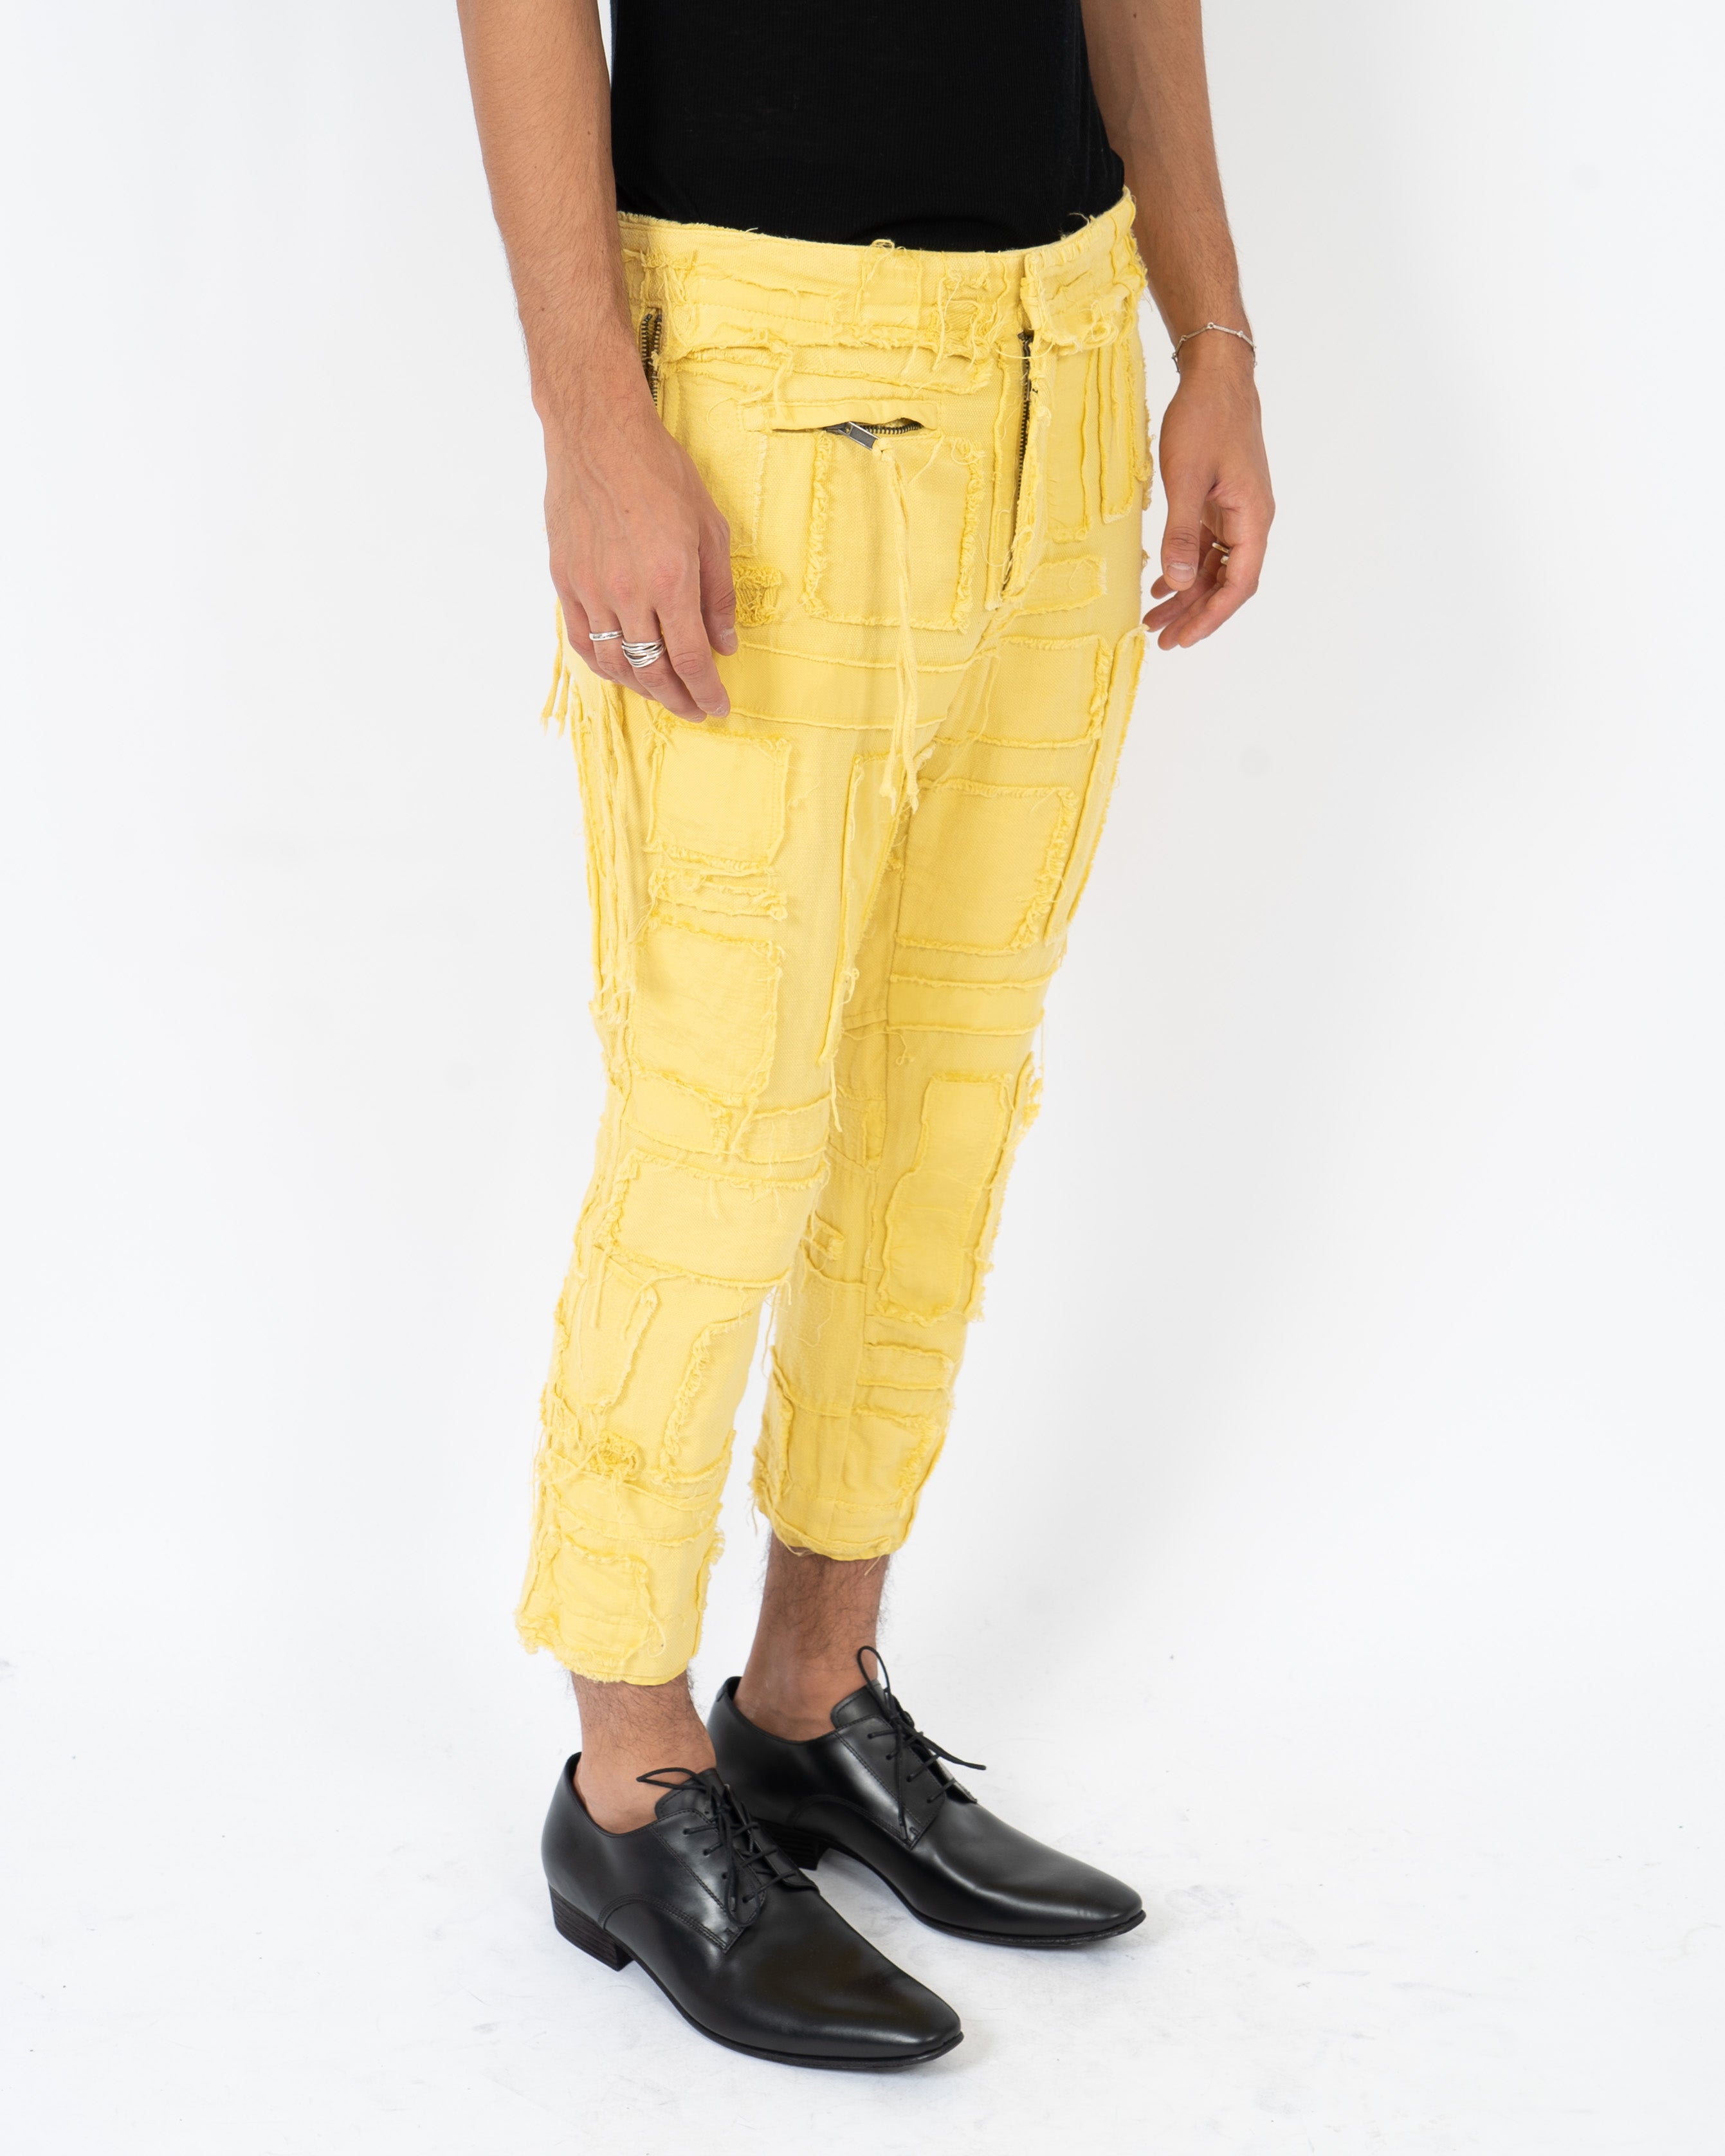 SS16 Yellow Distressed Patchwork Jogger